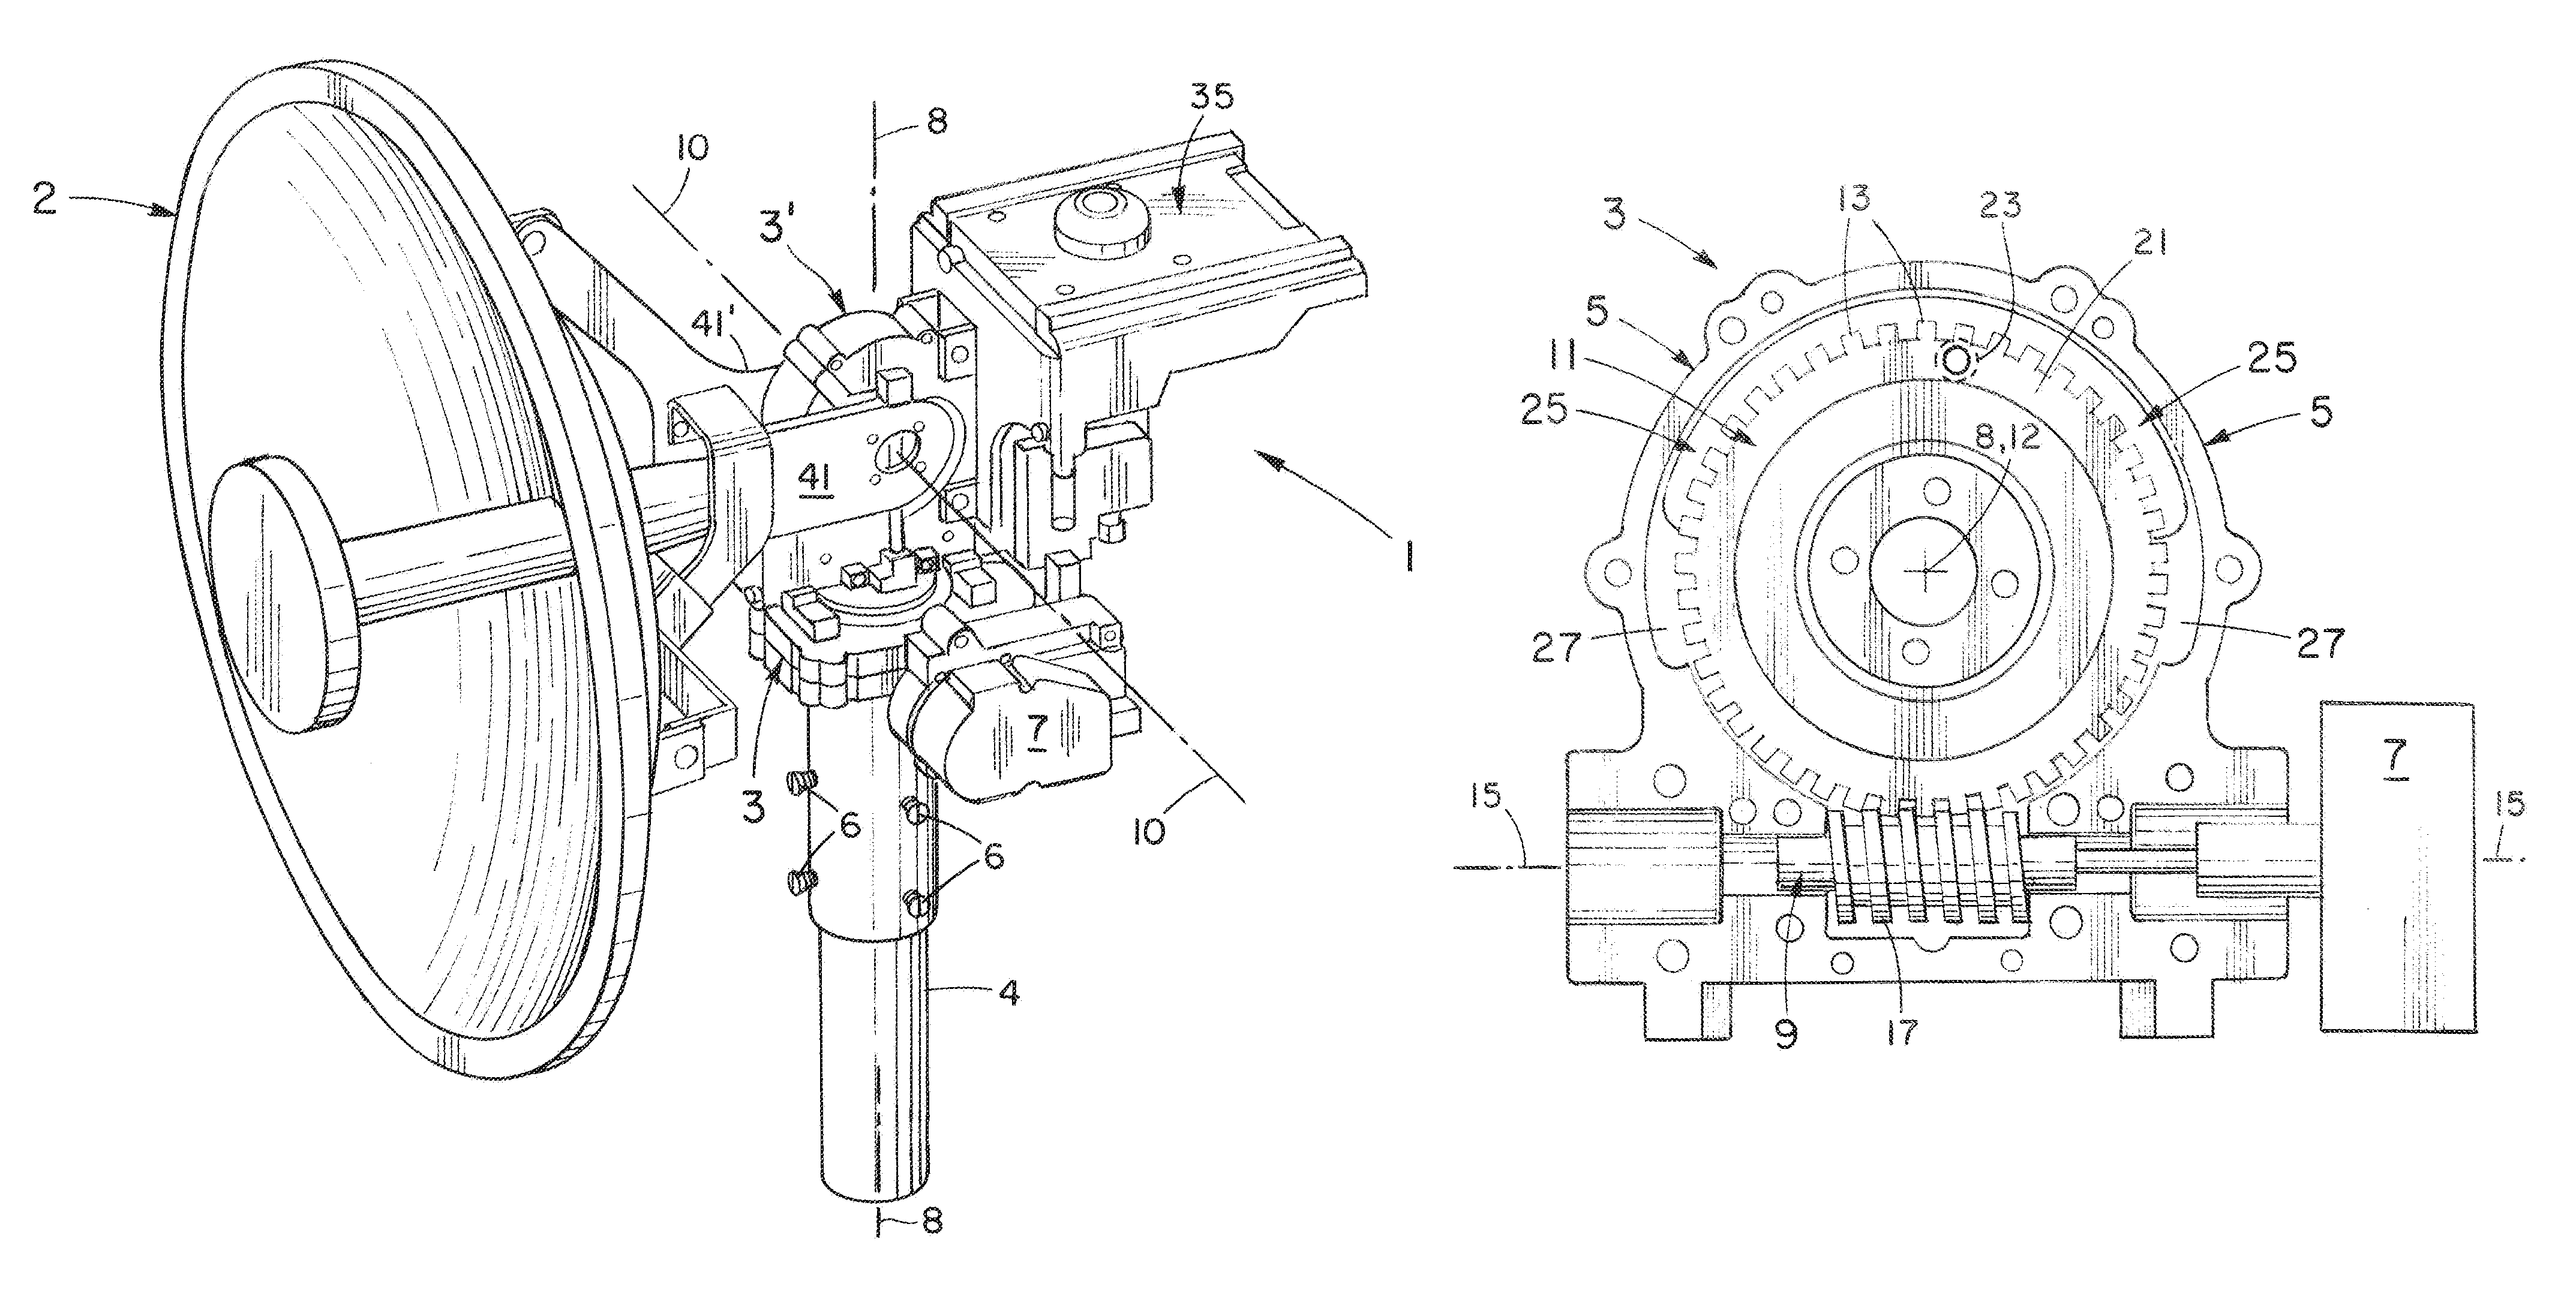 Antenna mount for selectively adjusting the azimuth, elevation, and skew alignments of an antenna